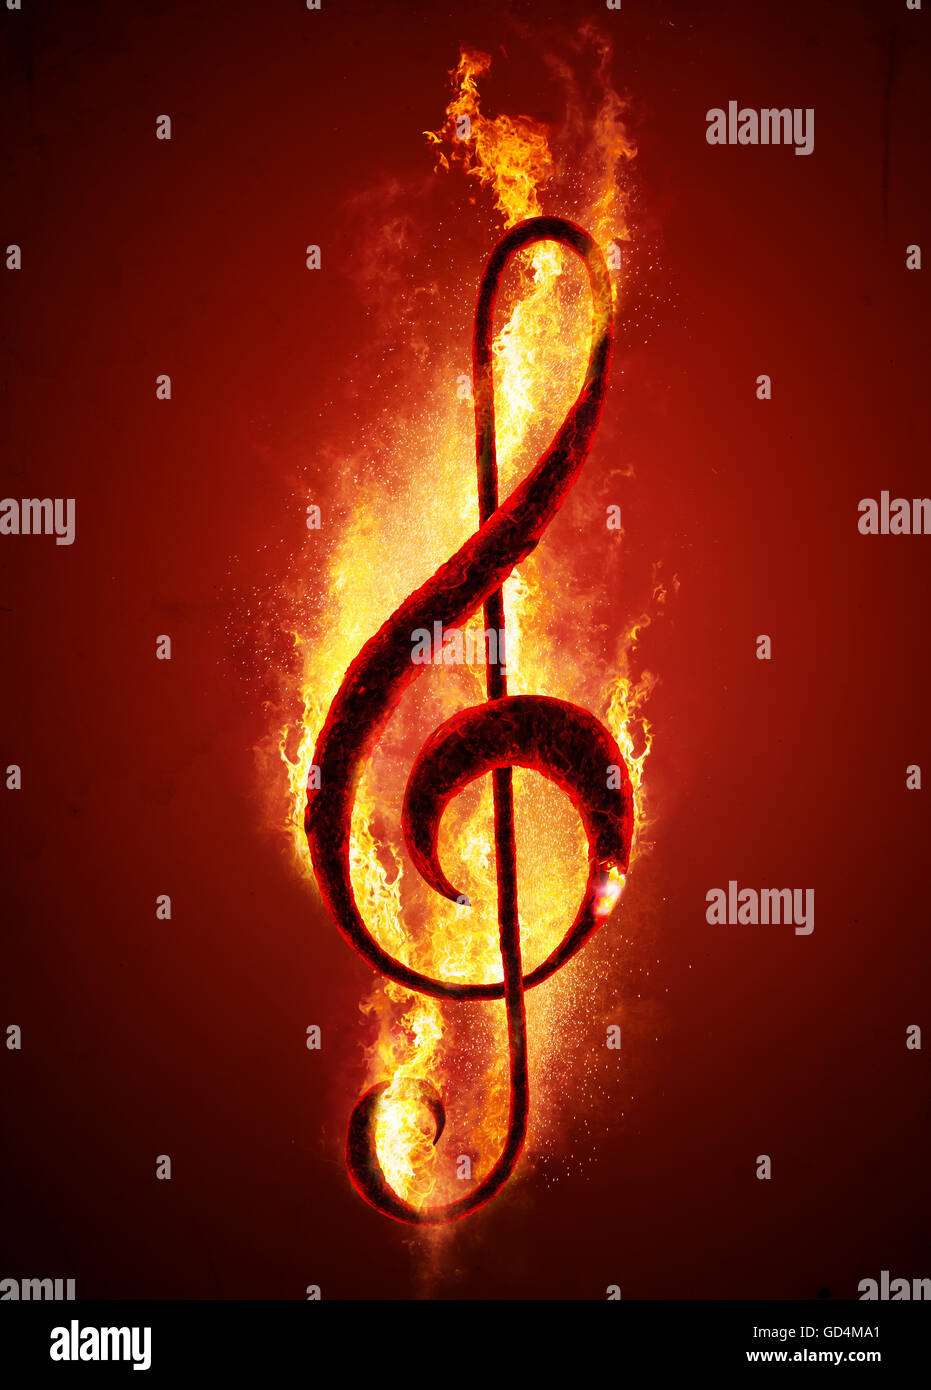 Musical note (treble clef) from hot charcoal on fire. Conceptual image of hot music. Stock Photo